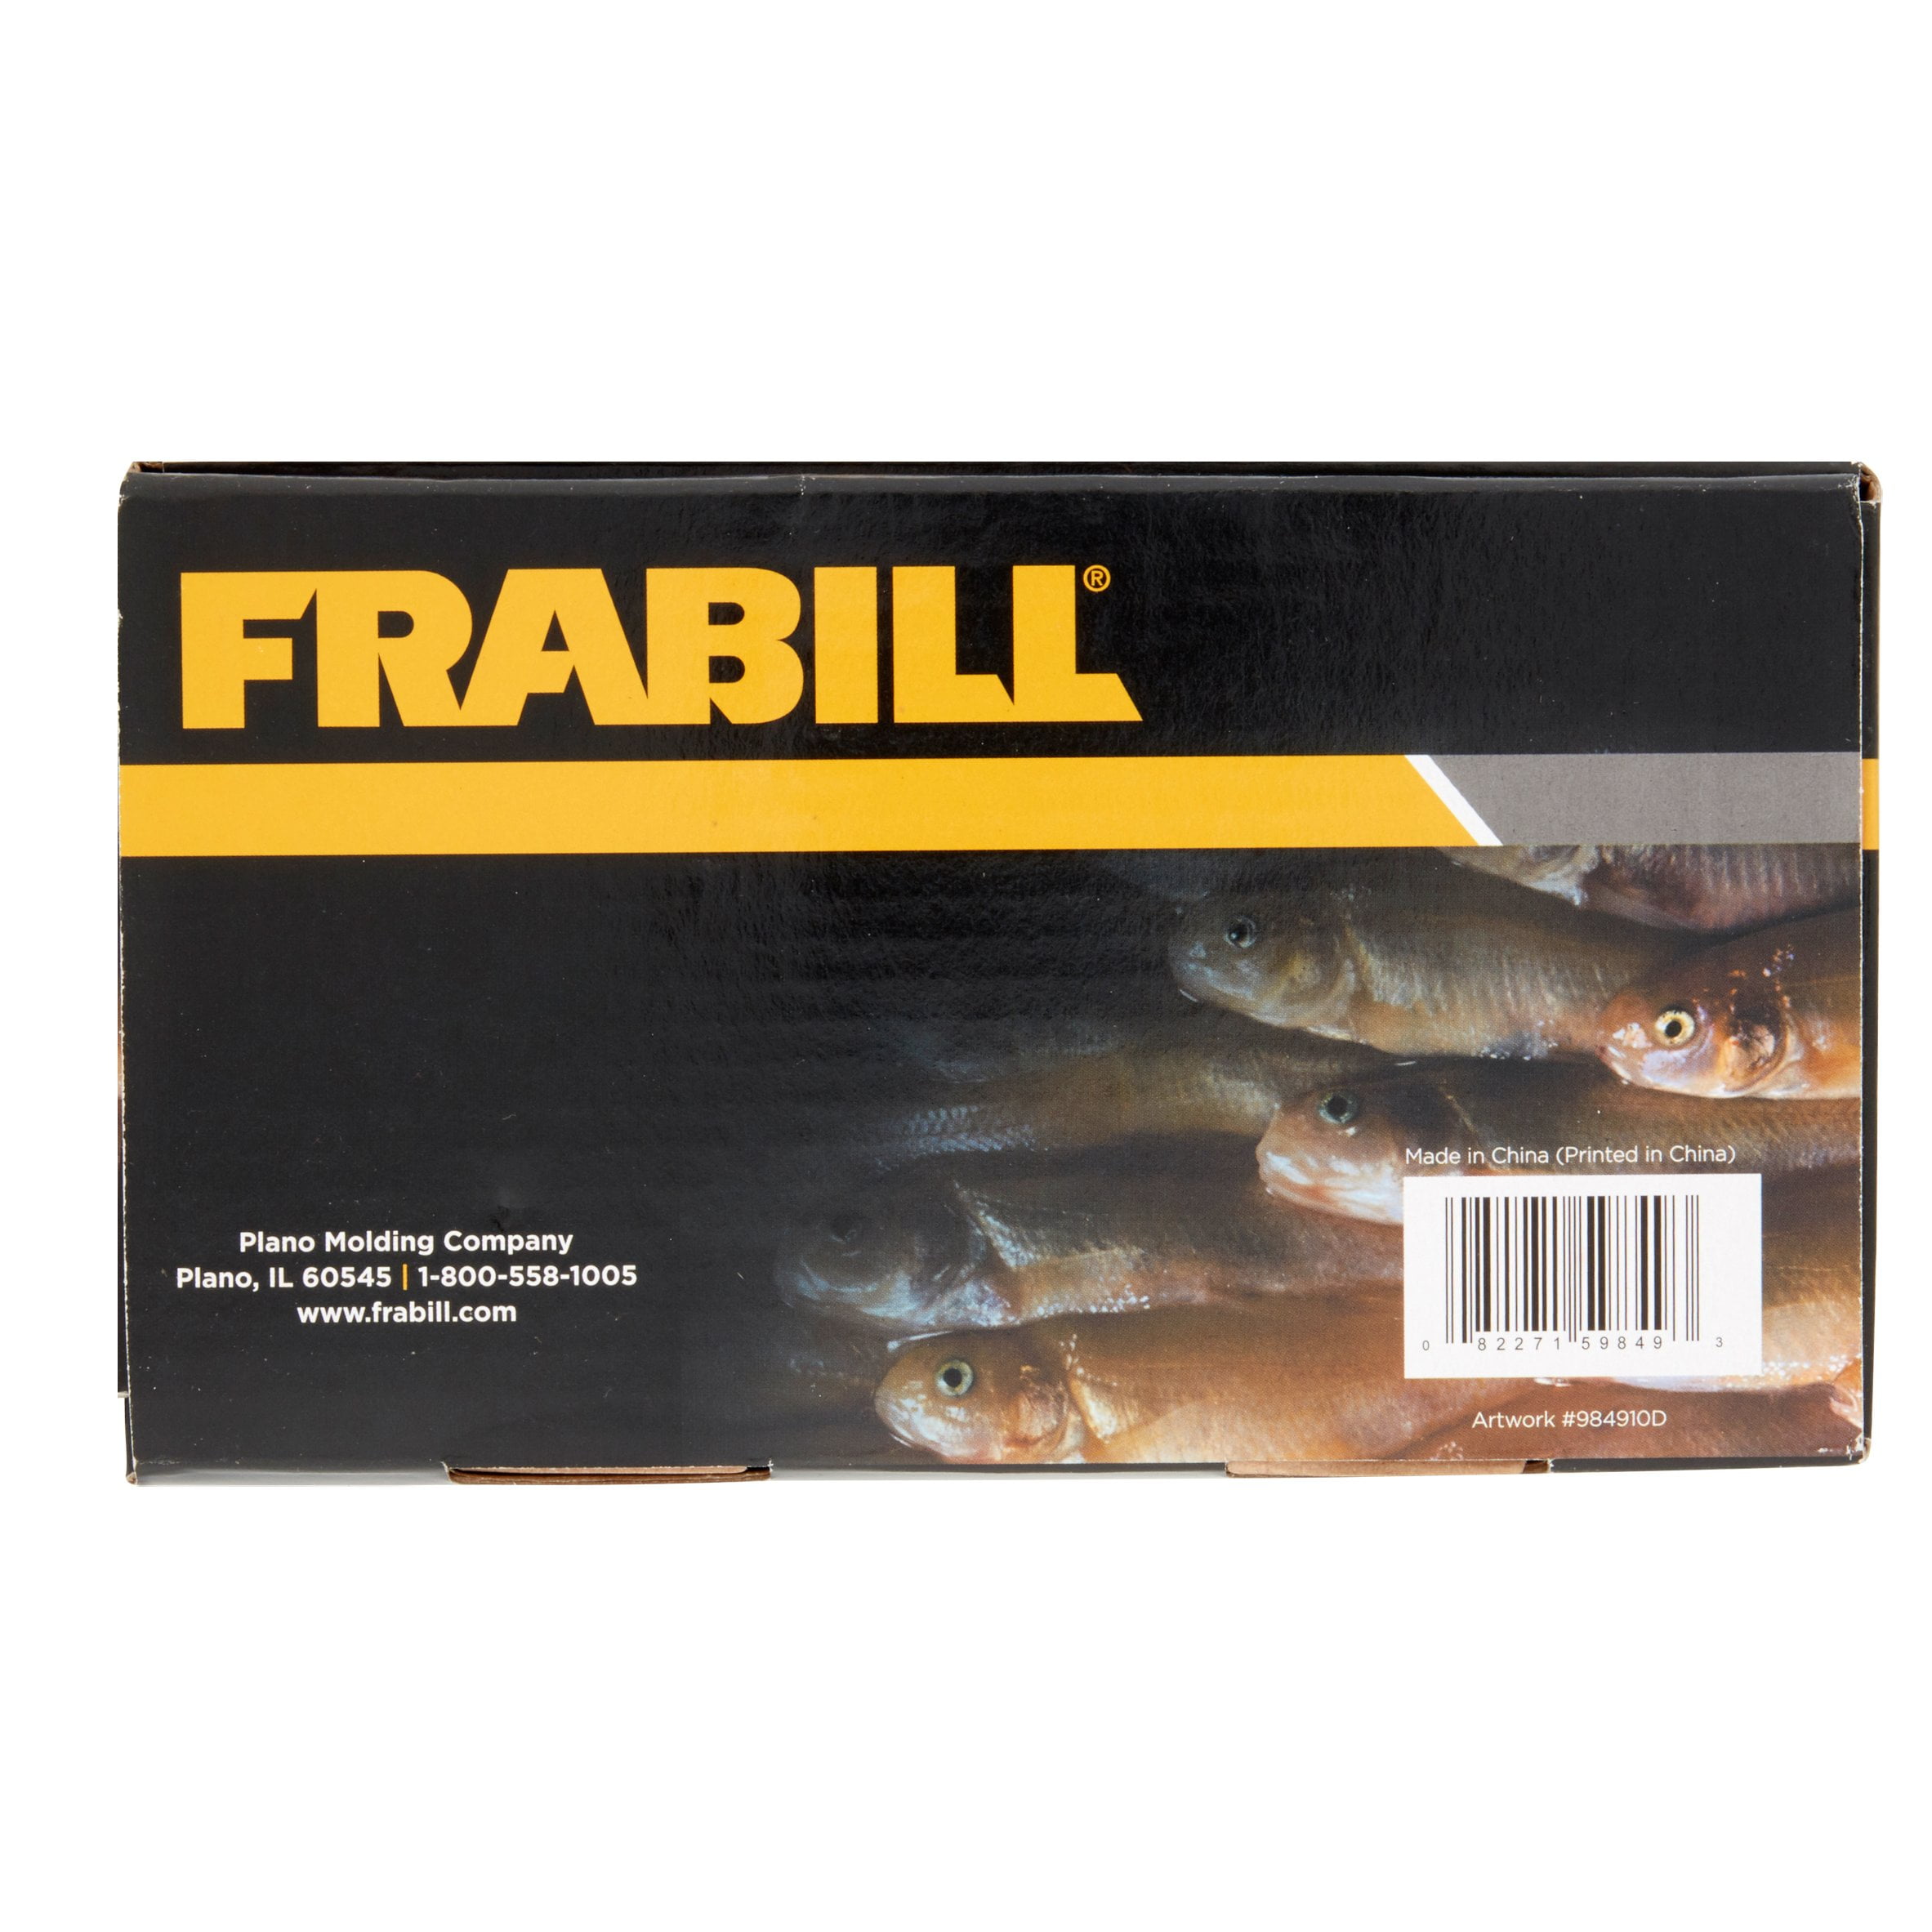 Frabill Acquires Snosuit - Wired2Fish